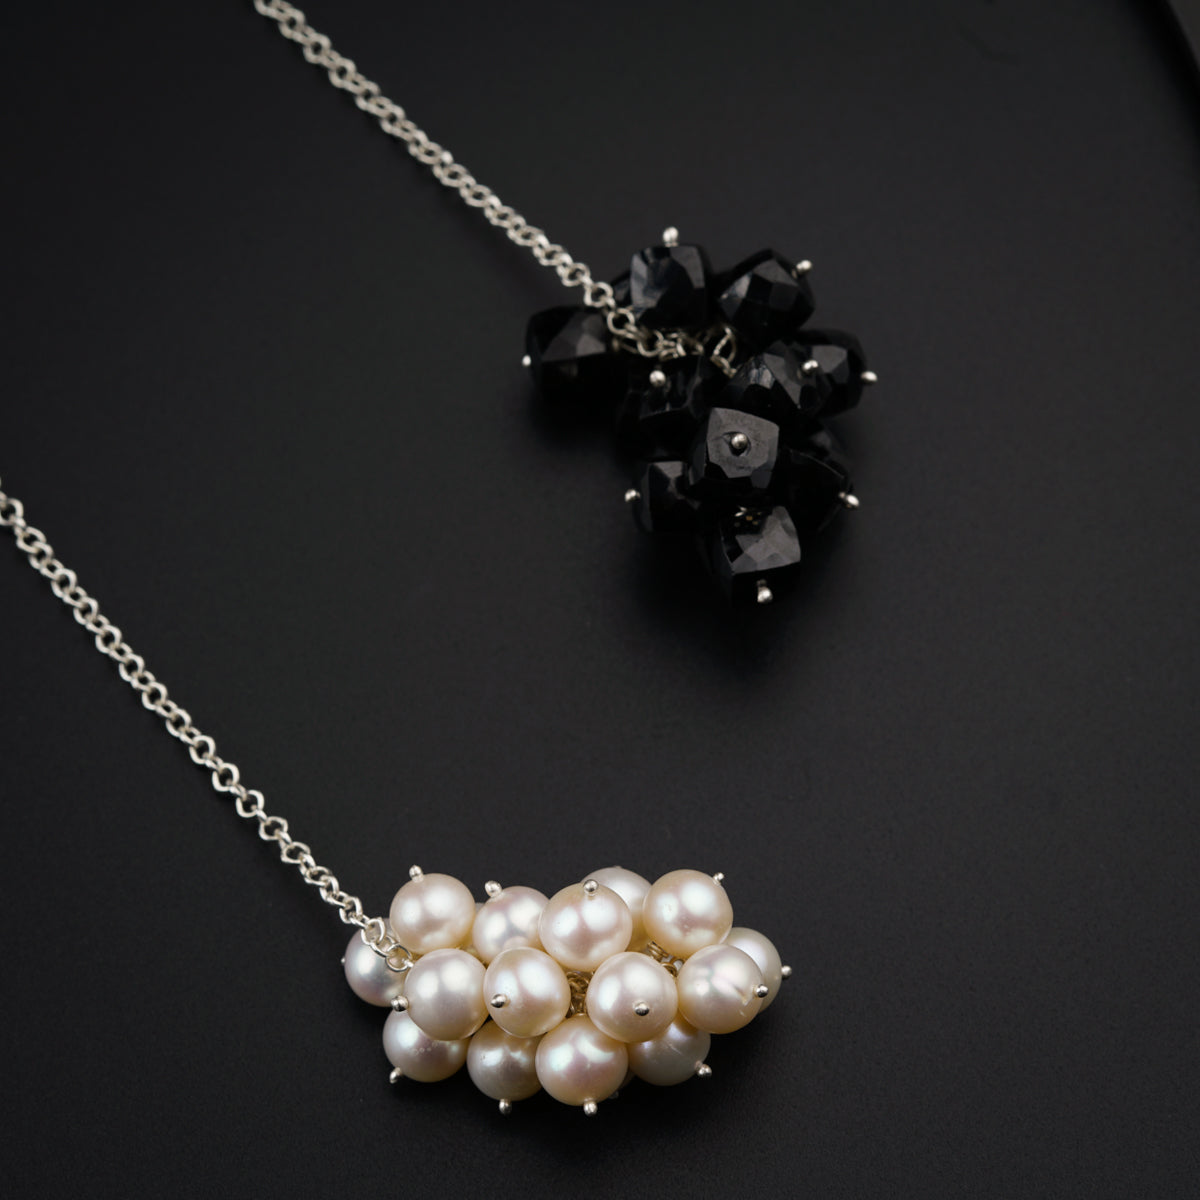 Tie and Wear Necklace: Fresh water Pearls And Black Spinel